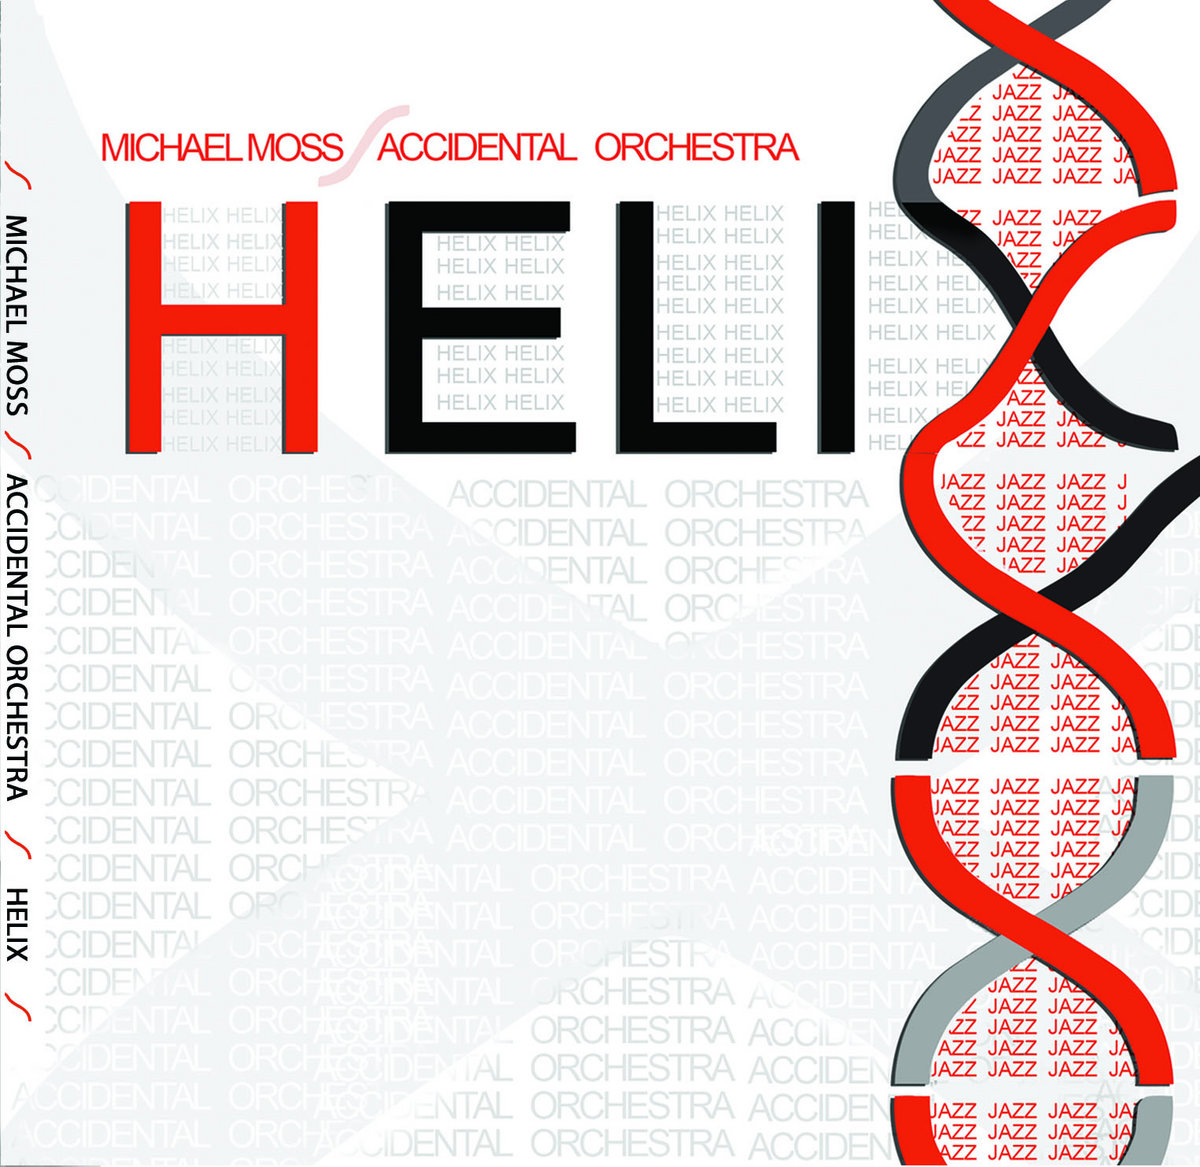 Image result for michael moss accidental orchestra helix